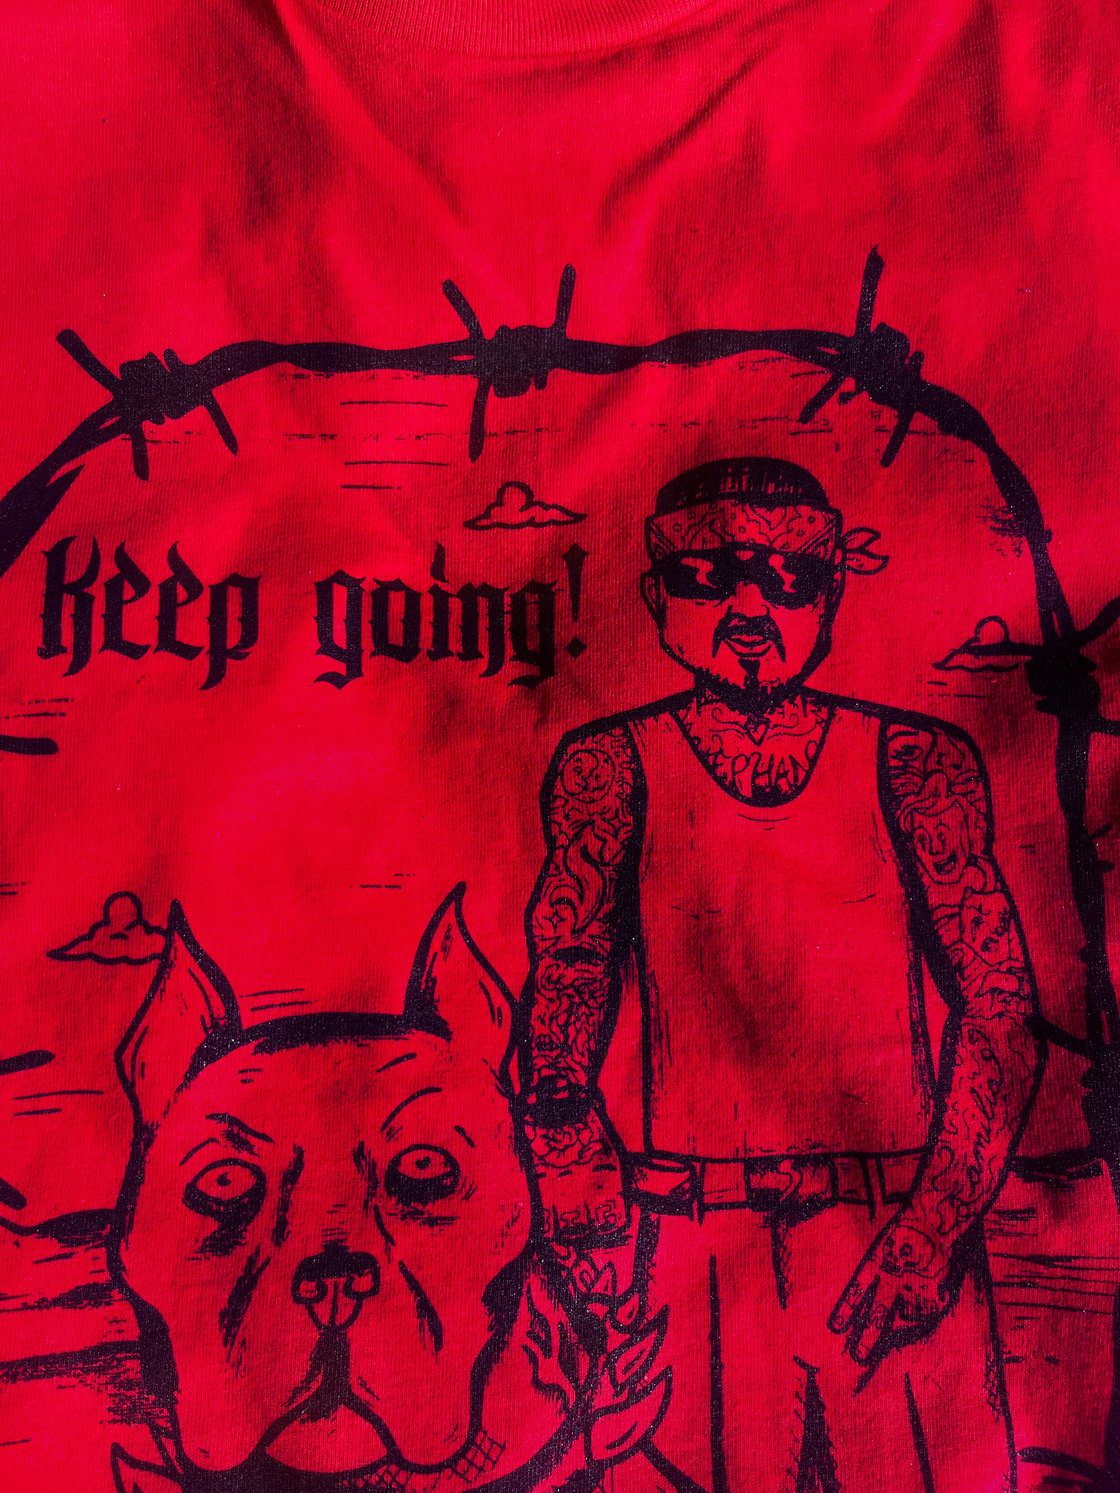 Image of Keep going! 